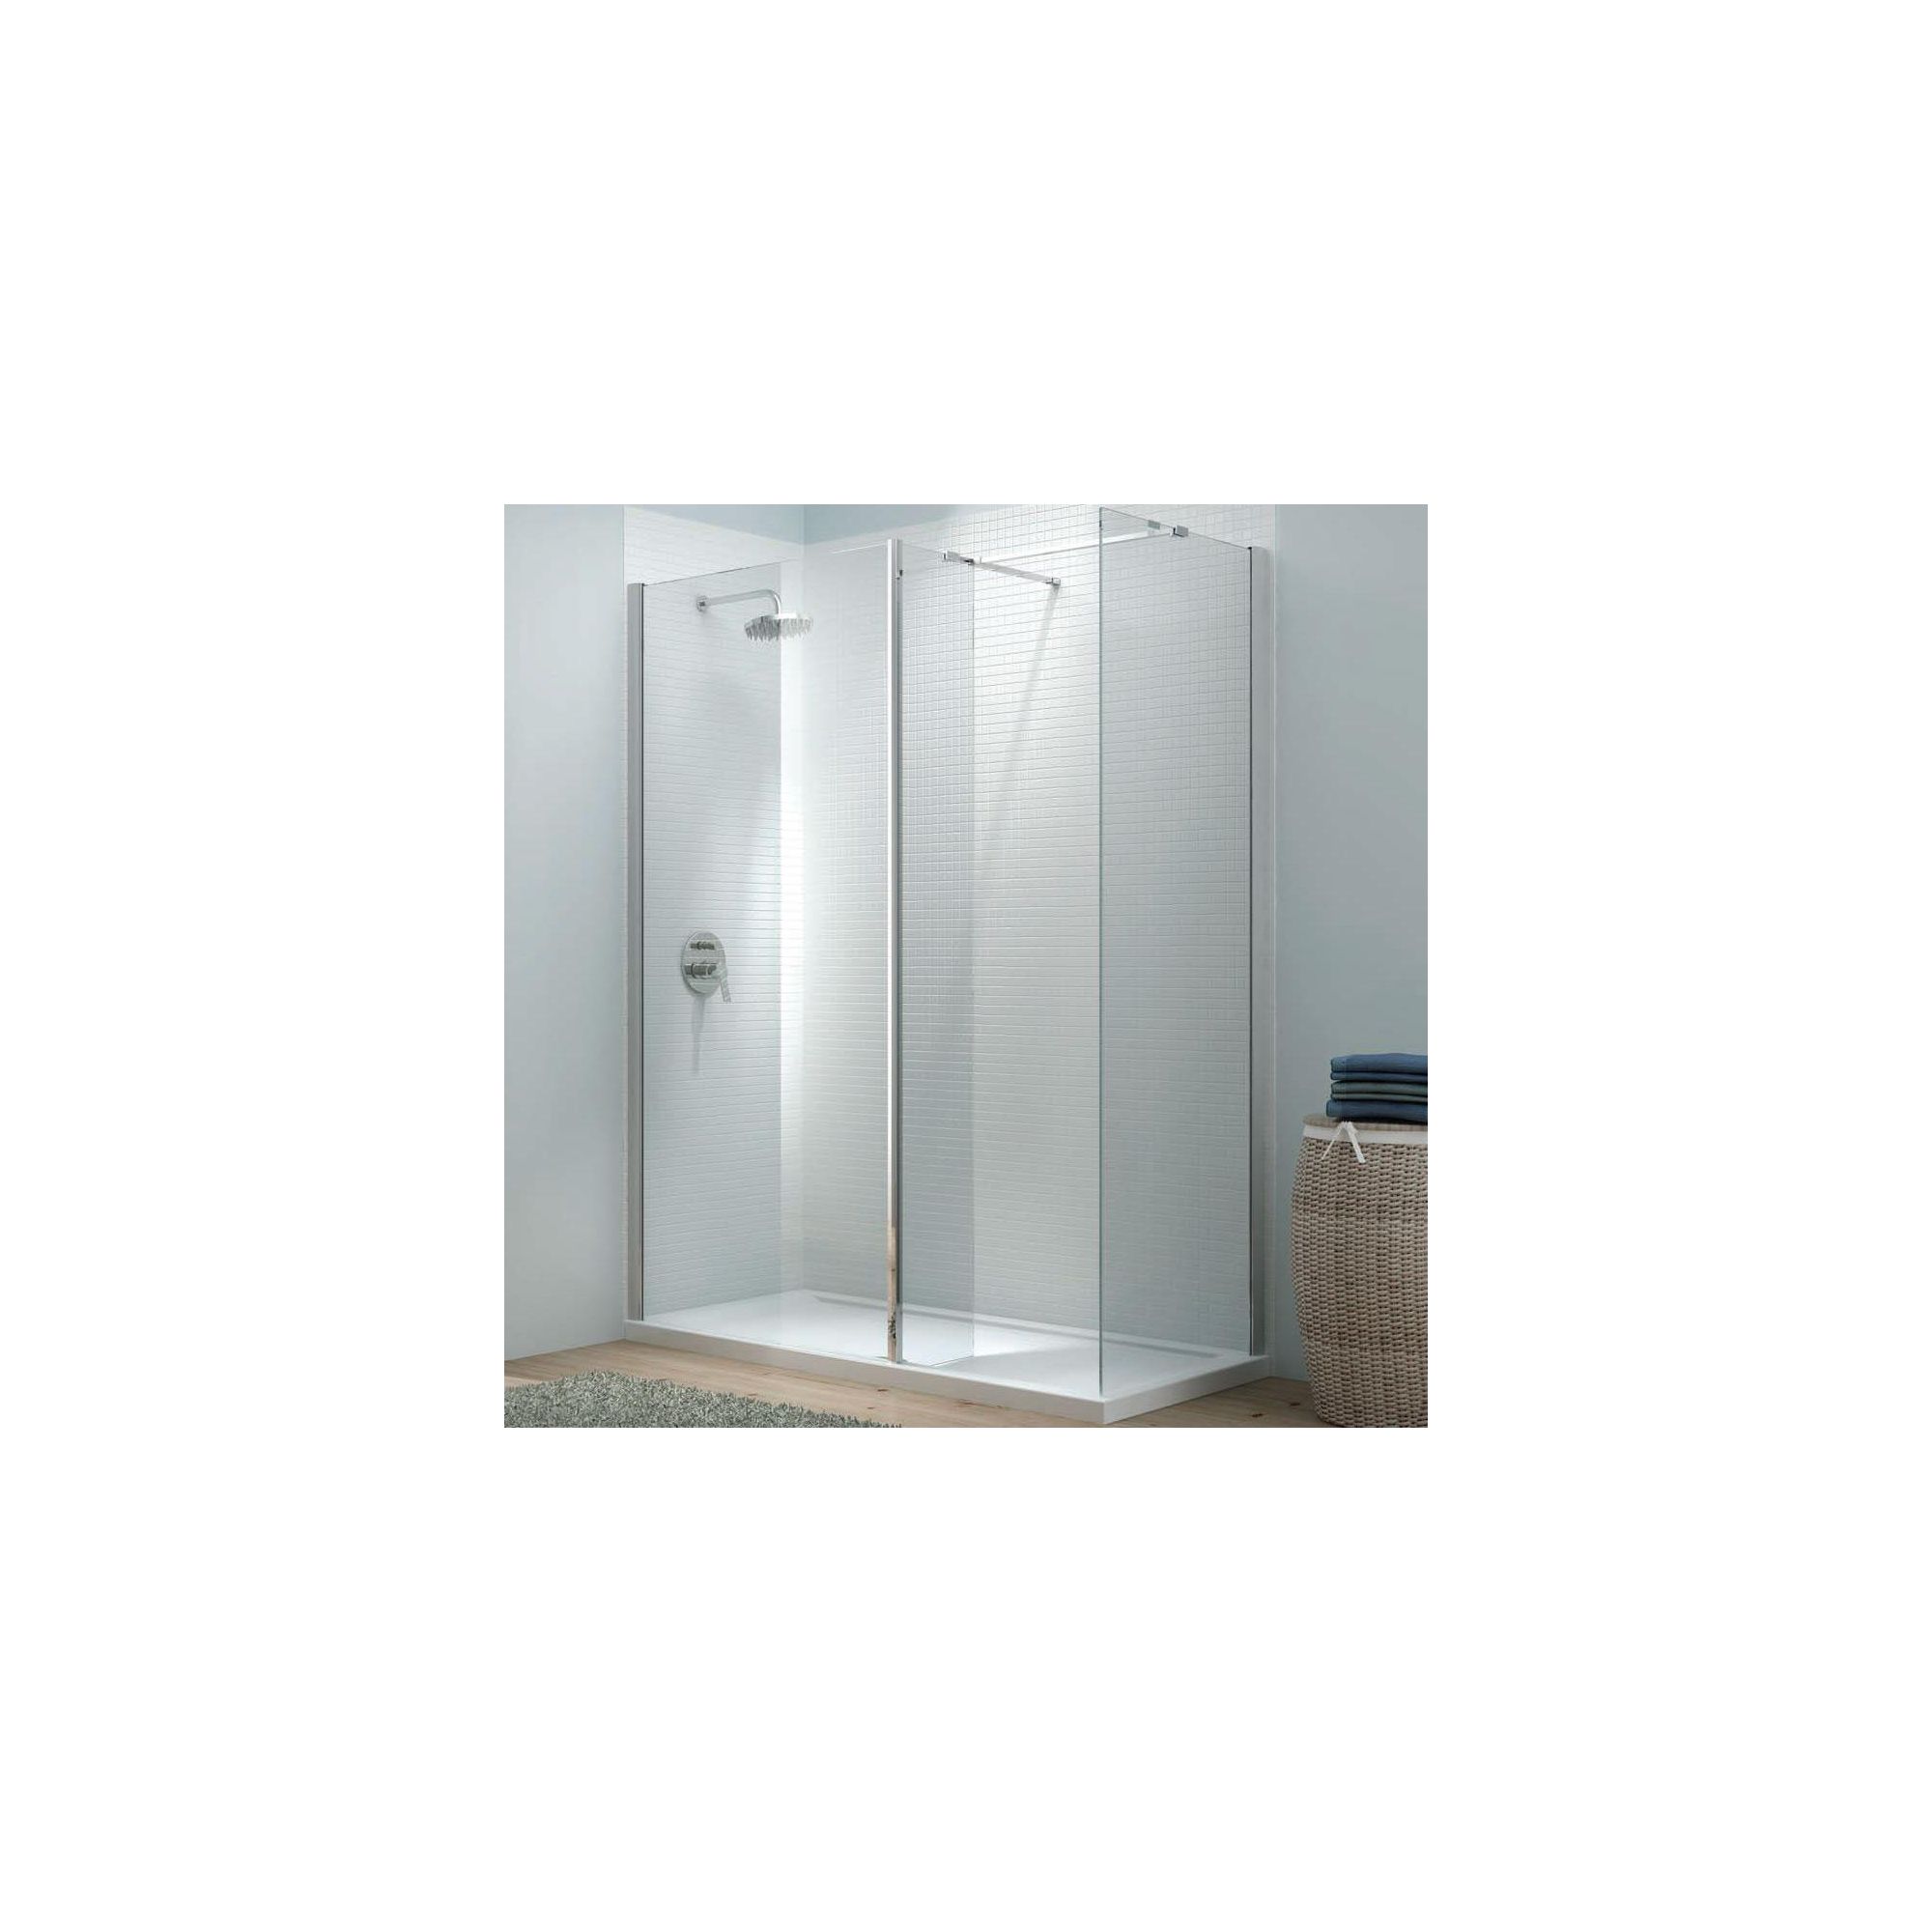 Merlyn Vivid Eight Cube Alcove Walk-In Shower Enclosure, 1400mm x 900mm, Low Profile Tray, 8mm Glass at Tesco Direct